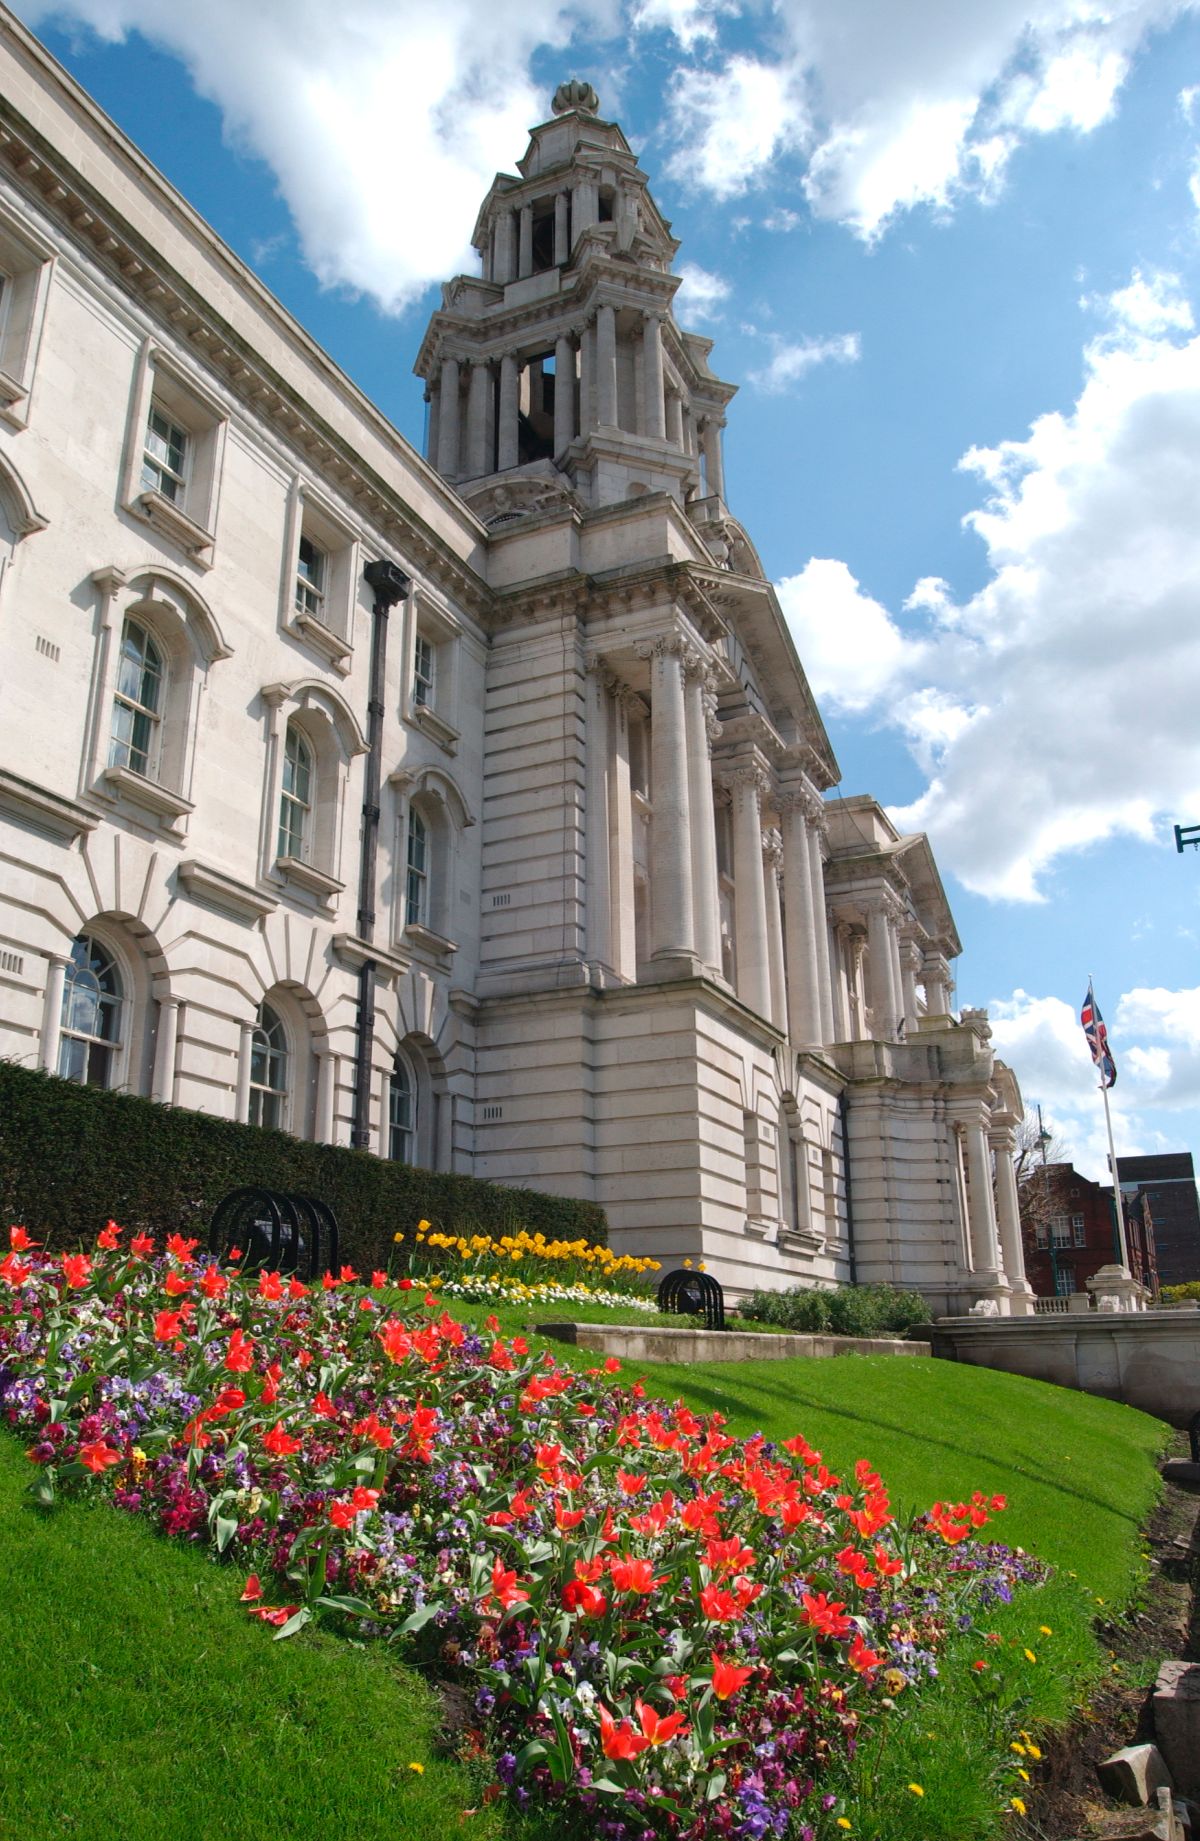 Gallery Item 19 for Stockport Town Hall